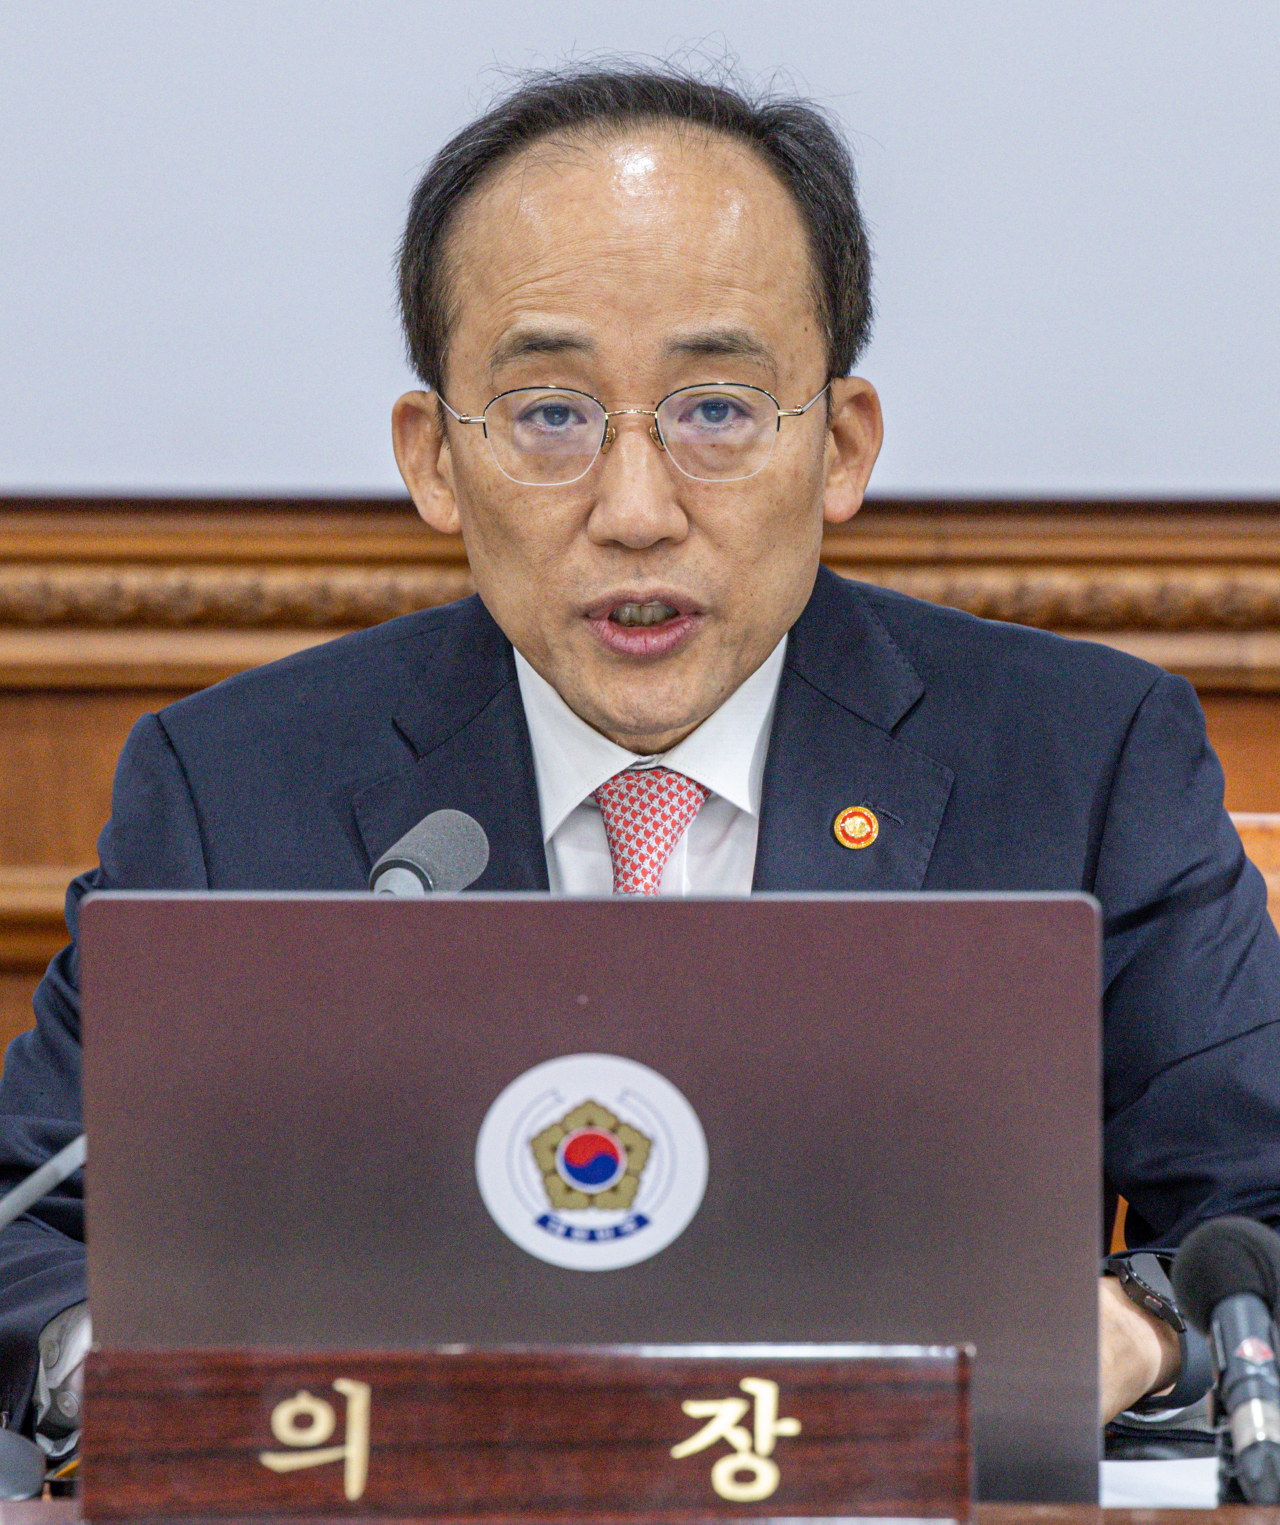 Finance Minister Choo Kyung-ho starts a meeting at the National Assembly in Seoul on Tuesday. (Yonhap)